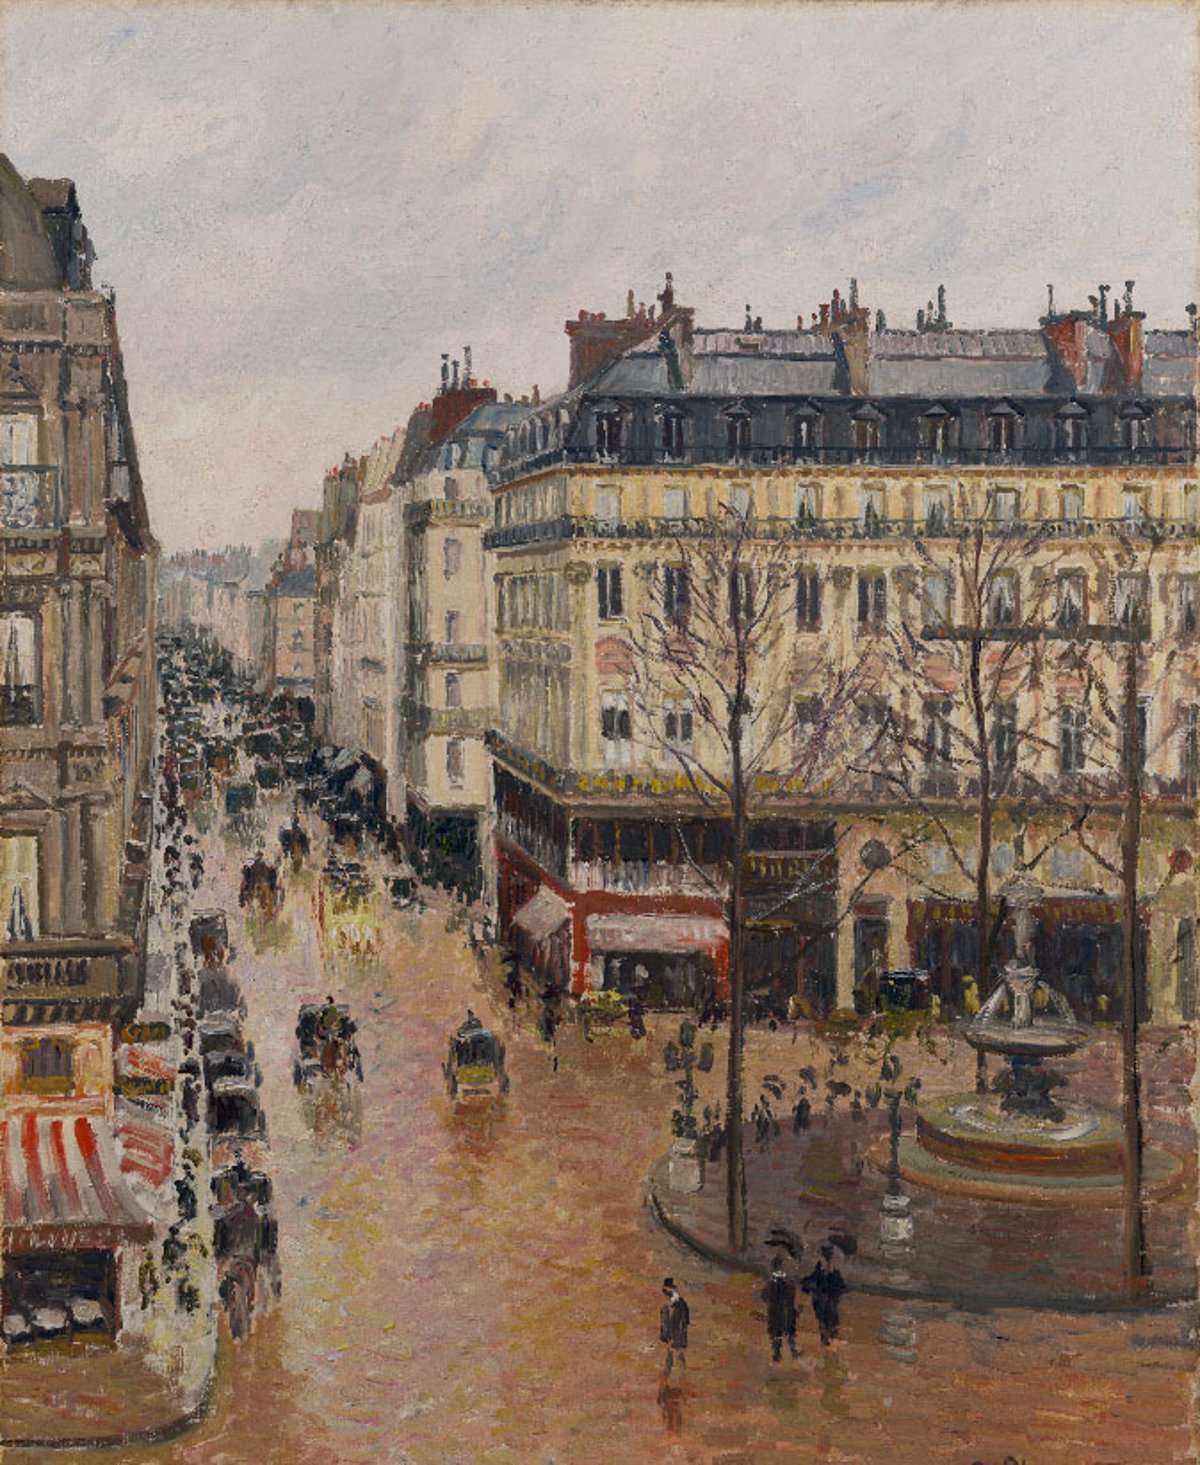 The US Supreme Court rules in favor of the Cassirer on the Pissarro looted by the Nazis and exhibited in the Thyssen